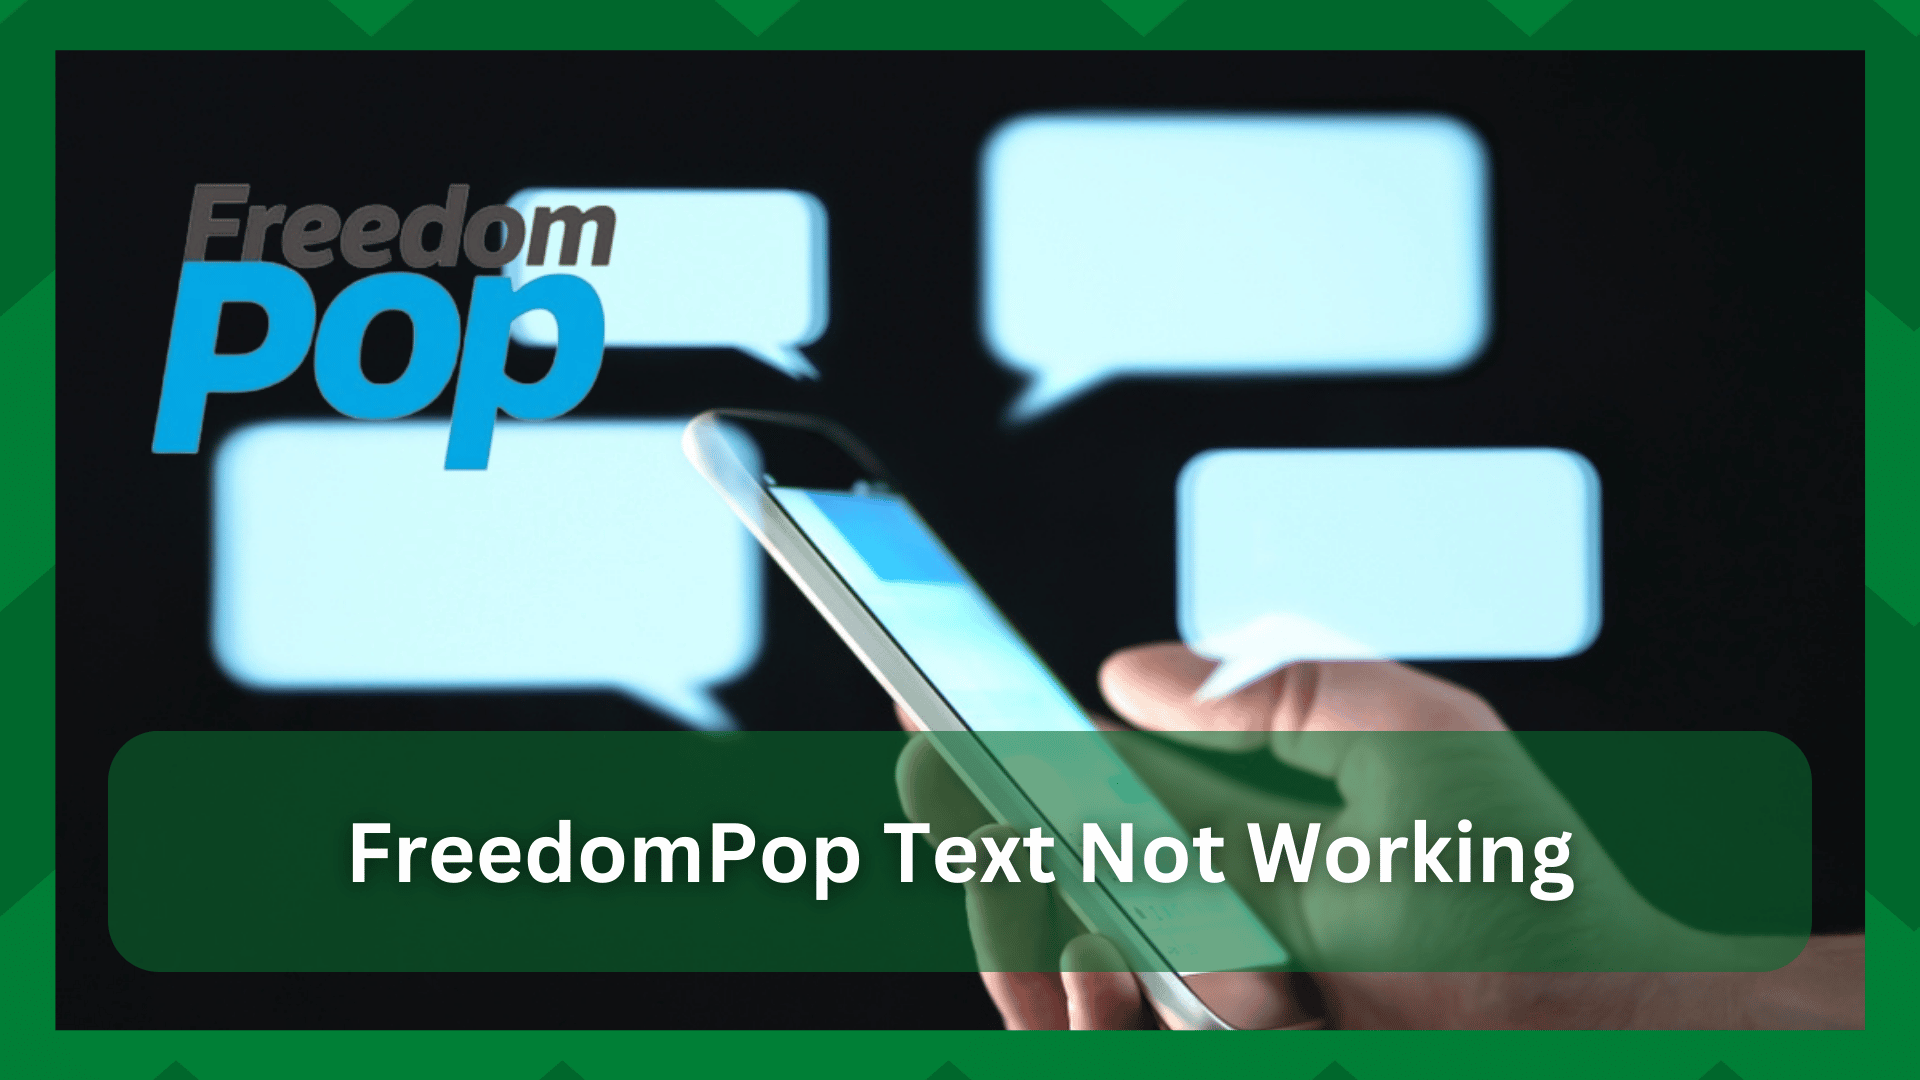 freedompop text not working